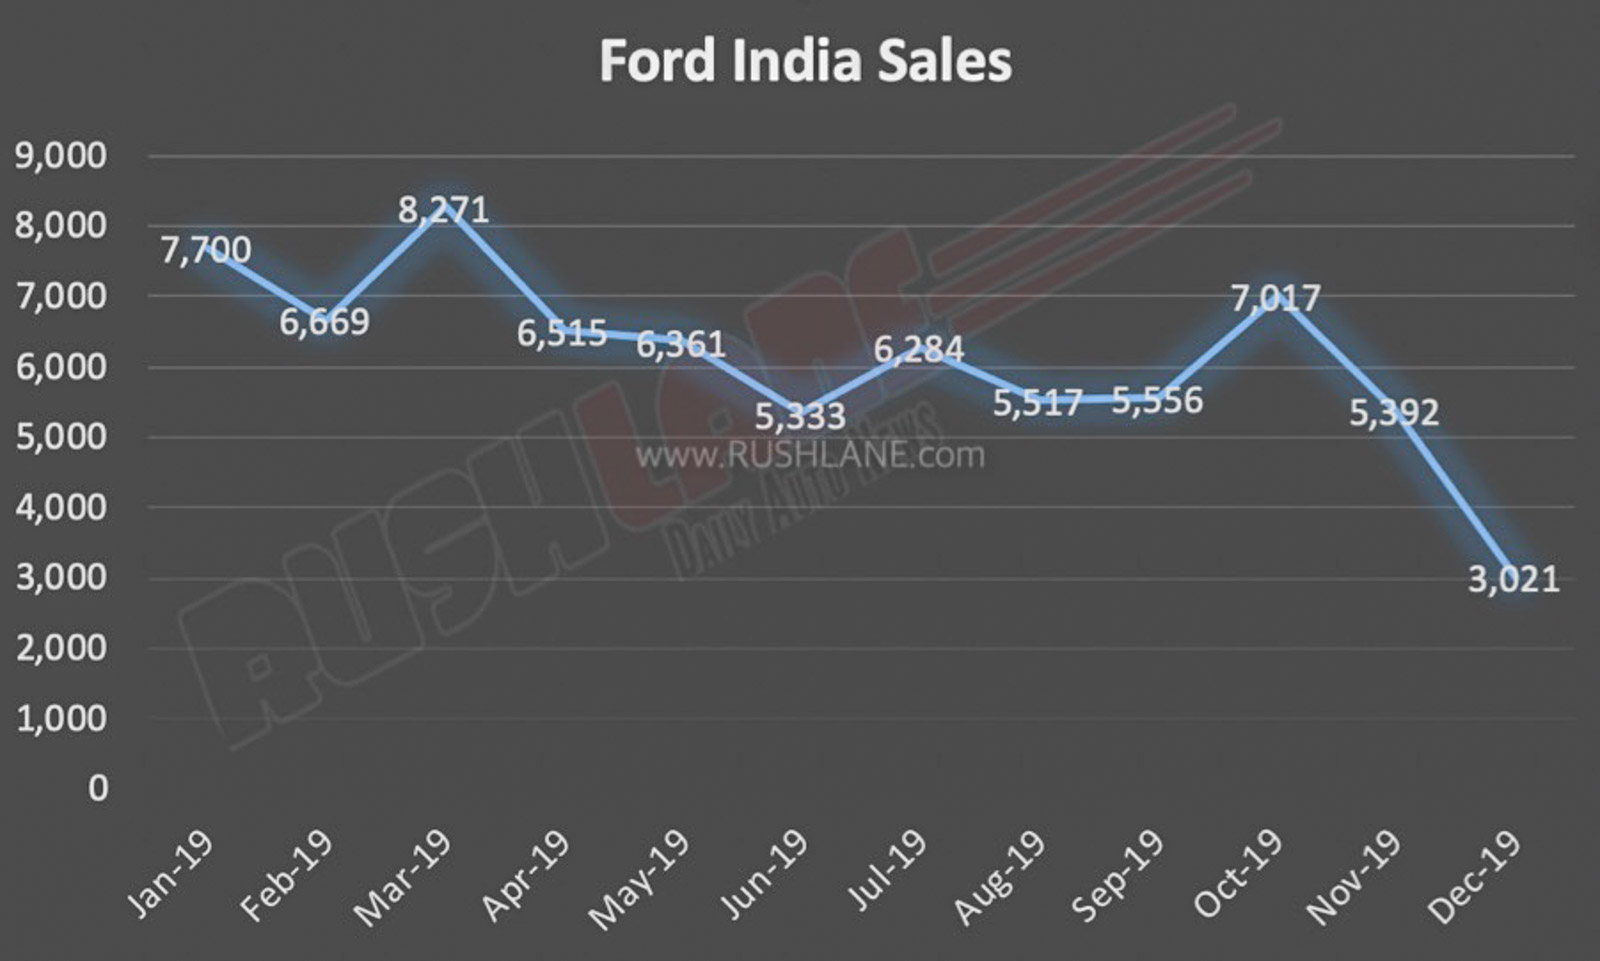 Ford India sales in 2019